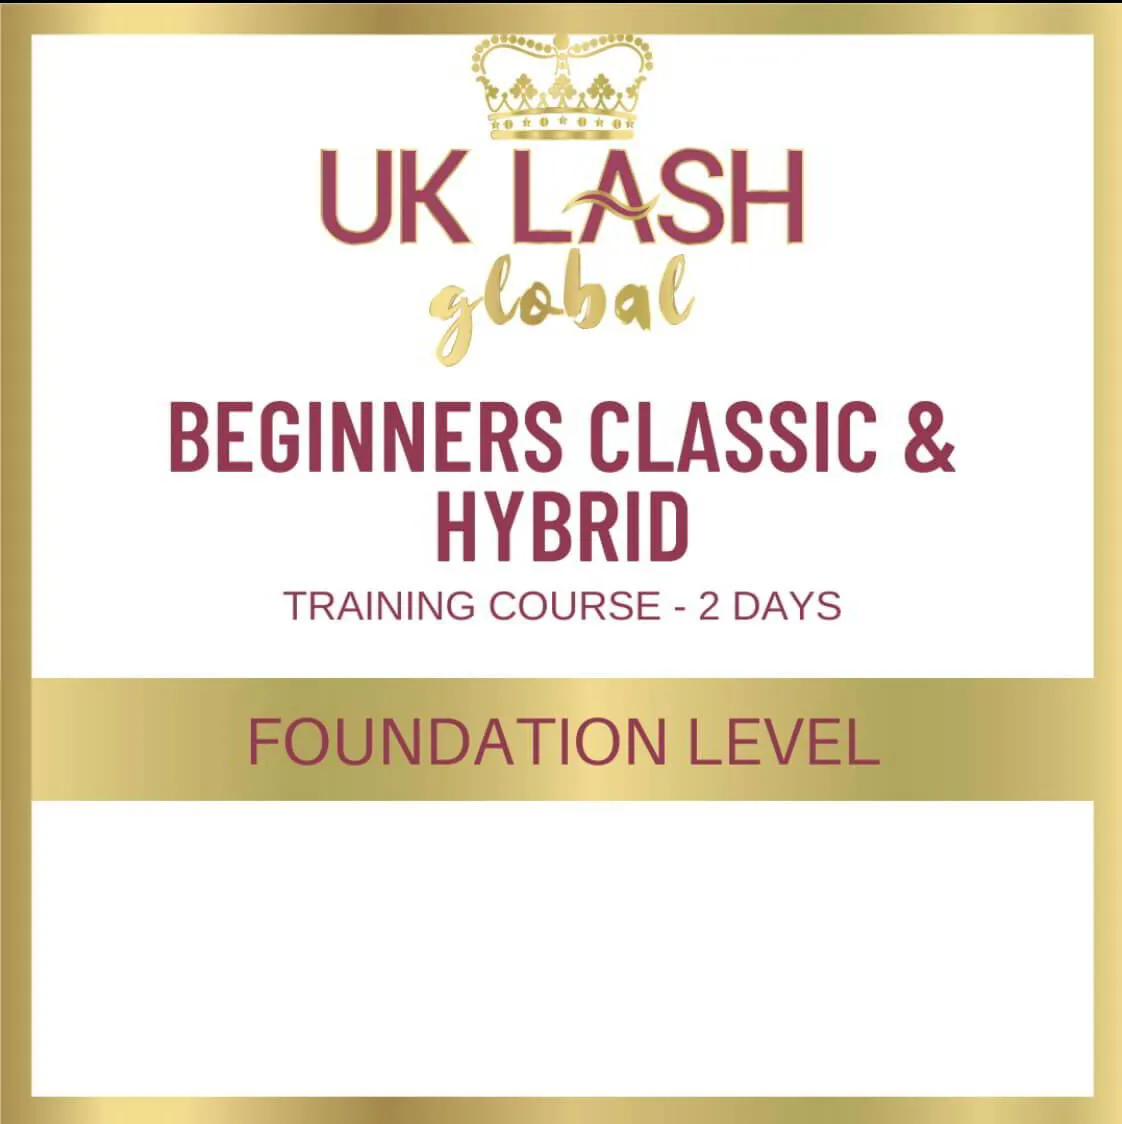 uk lash global beginners classic training course Gloucestershire, south west , coco chic beauty